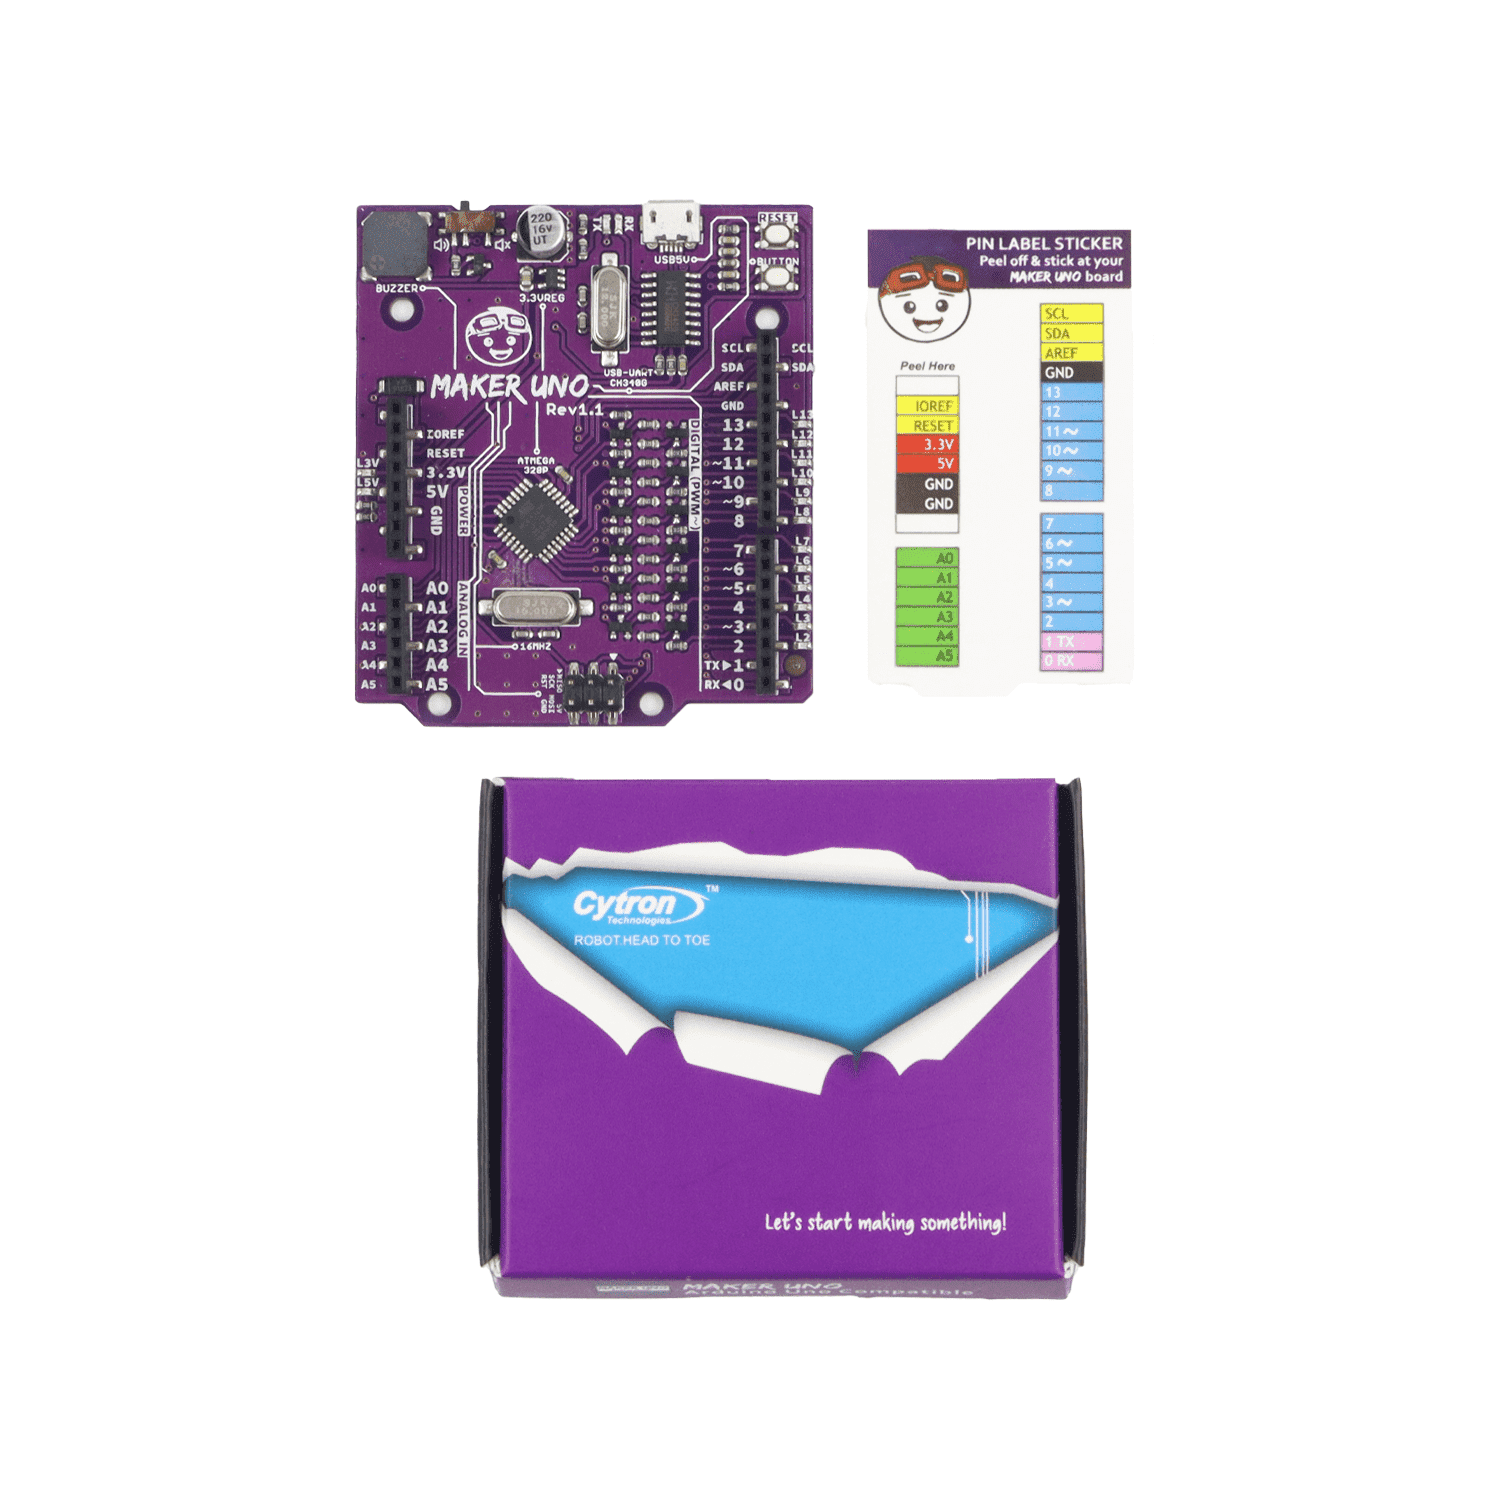 Maker Uno Simplifying Arduino For Education 6564